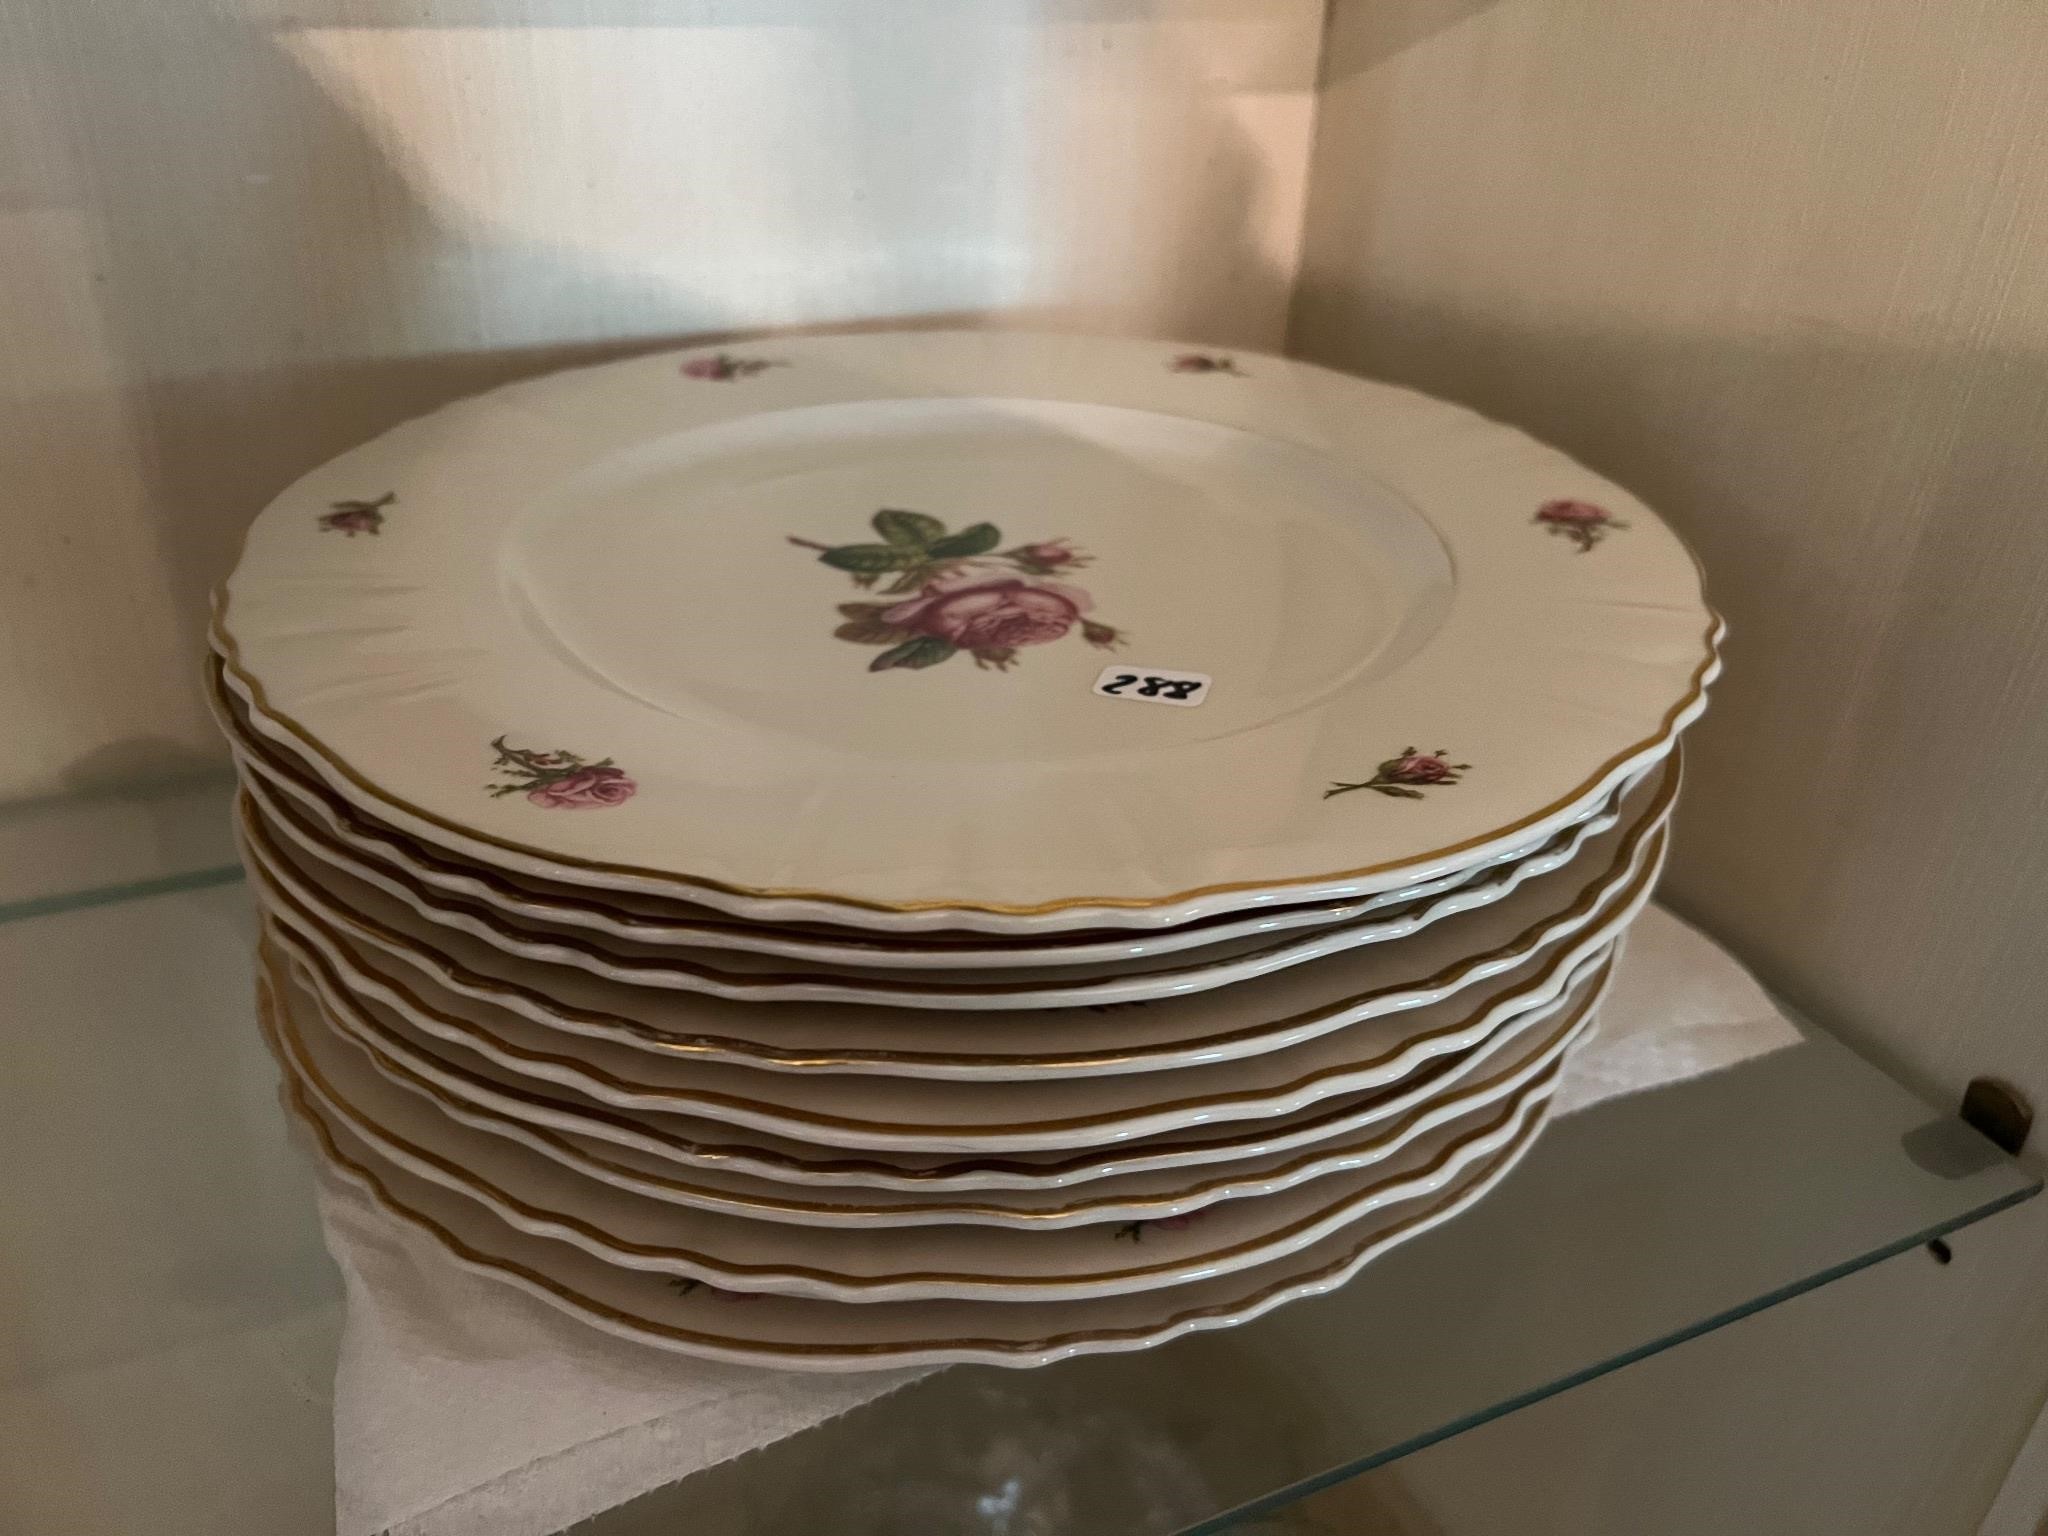 VICTORIA FEDERAL CHINA MADE IN USA 10 PLATES